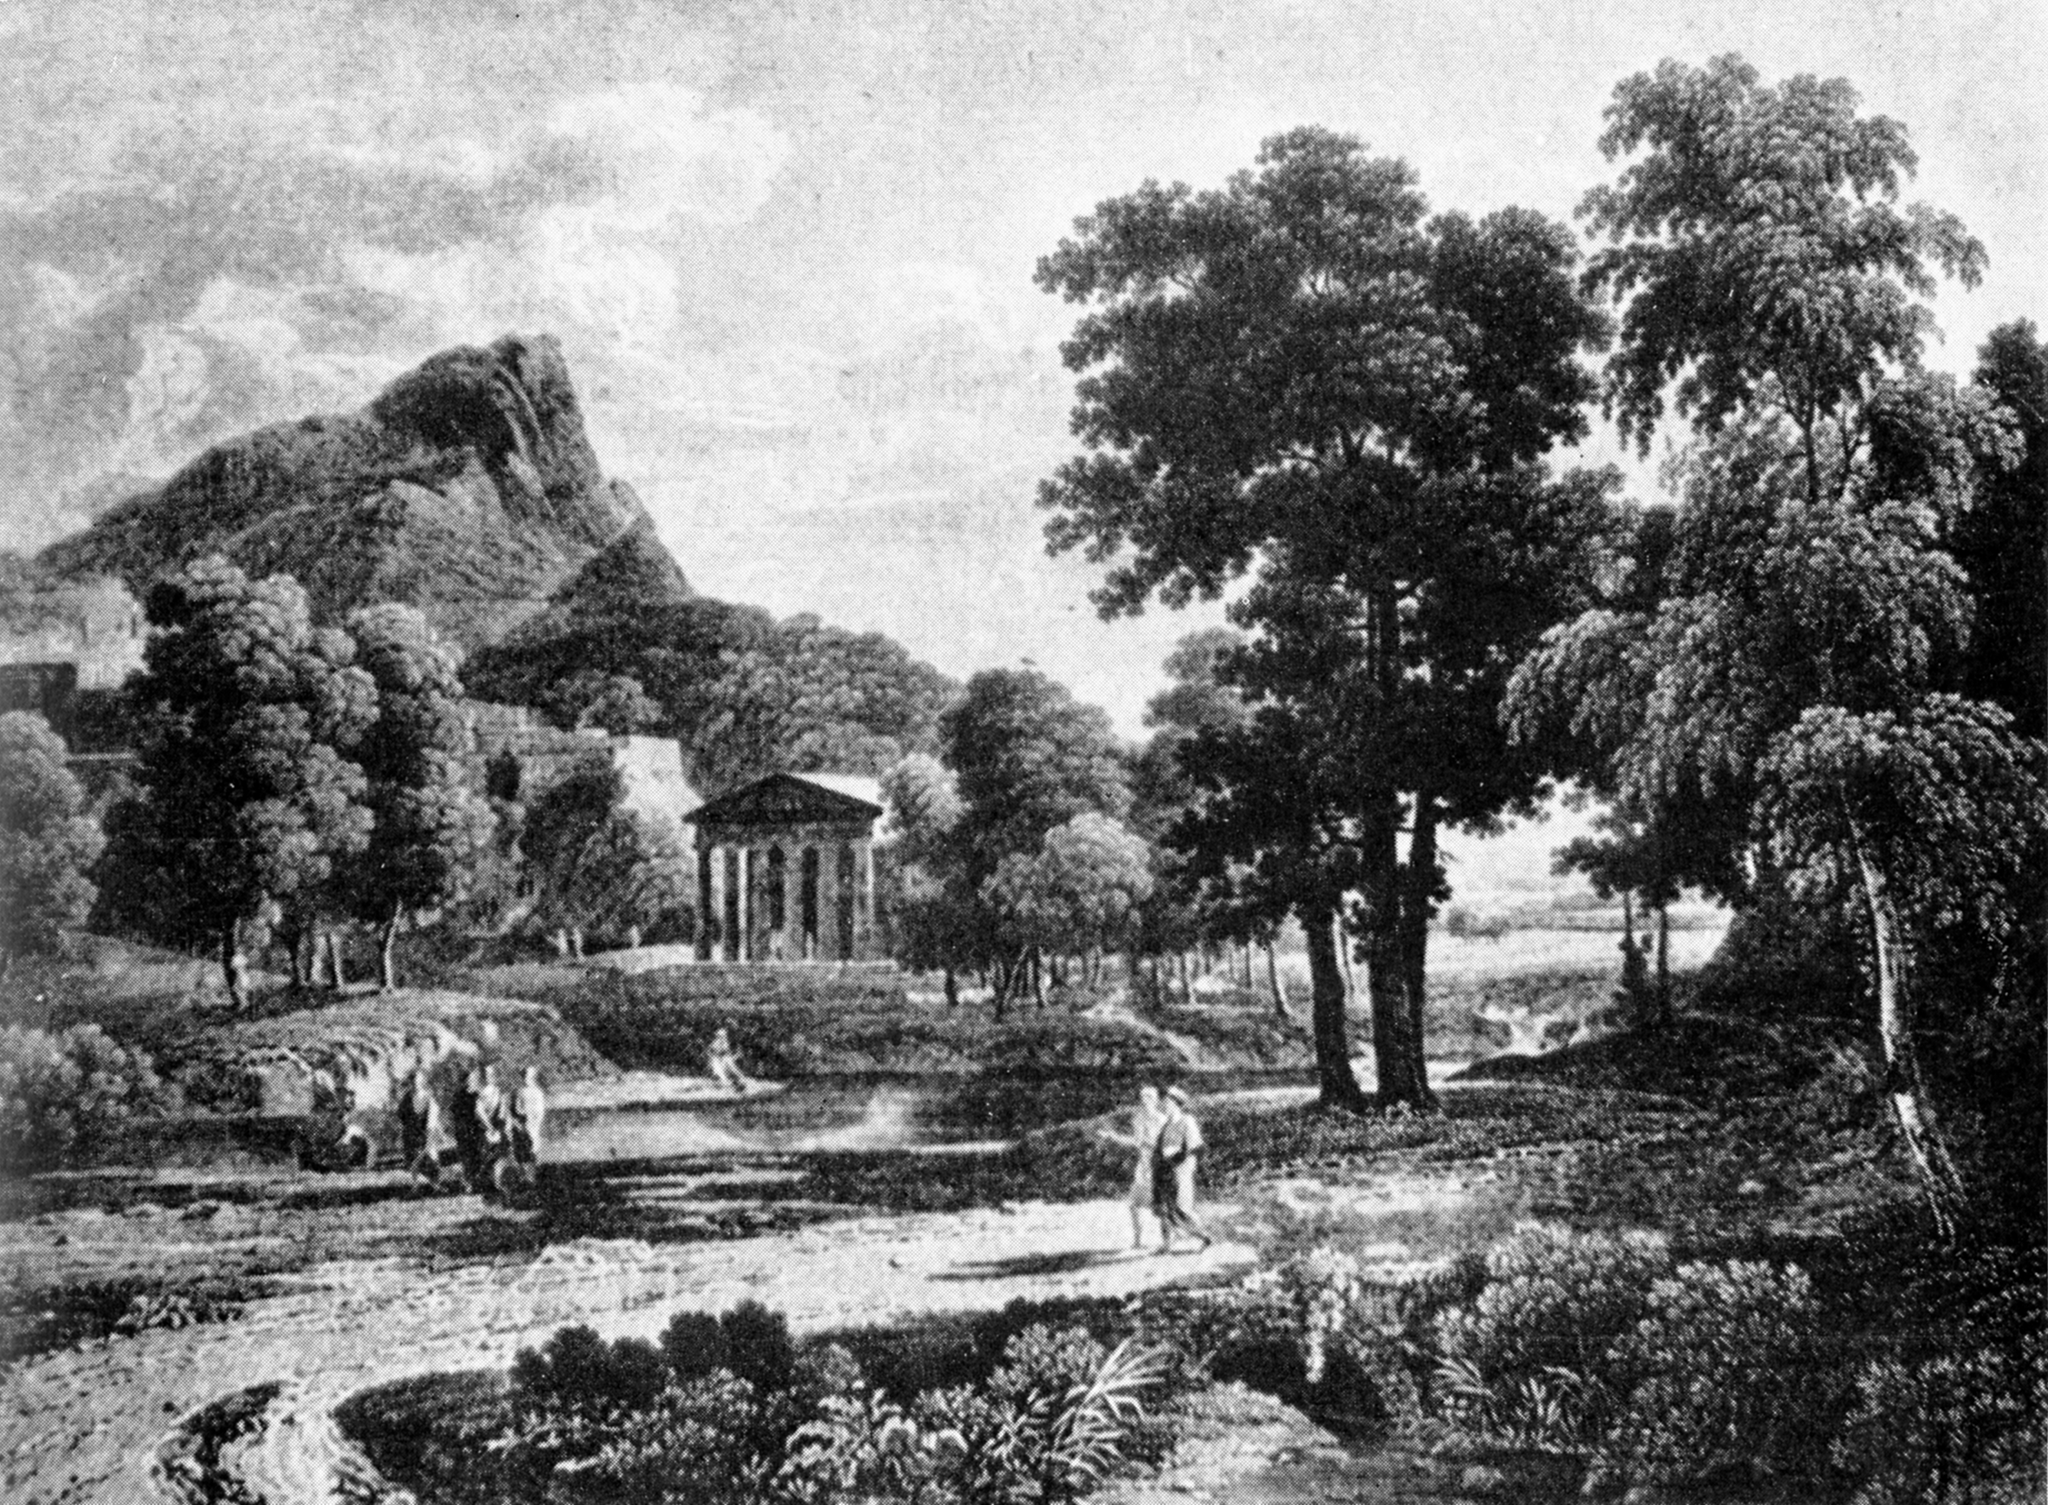 A black and white print of a painting depicting a trail leading up to a temple with large stone pillars. A group of people walking along it. On its sides are large trees and hills. Behind the temple, there is a large rocky mountain surrounded by more trees.